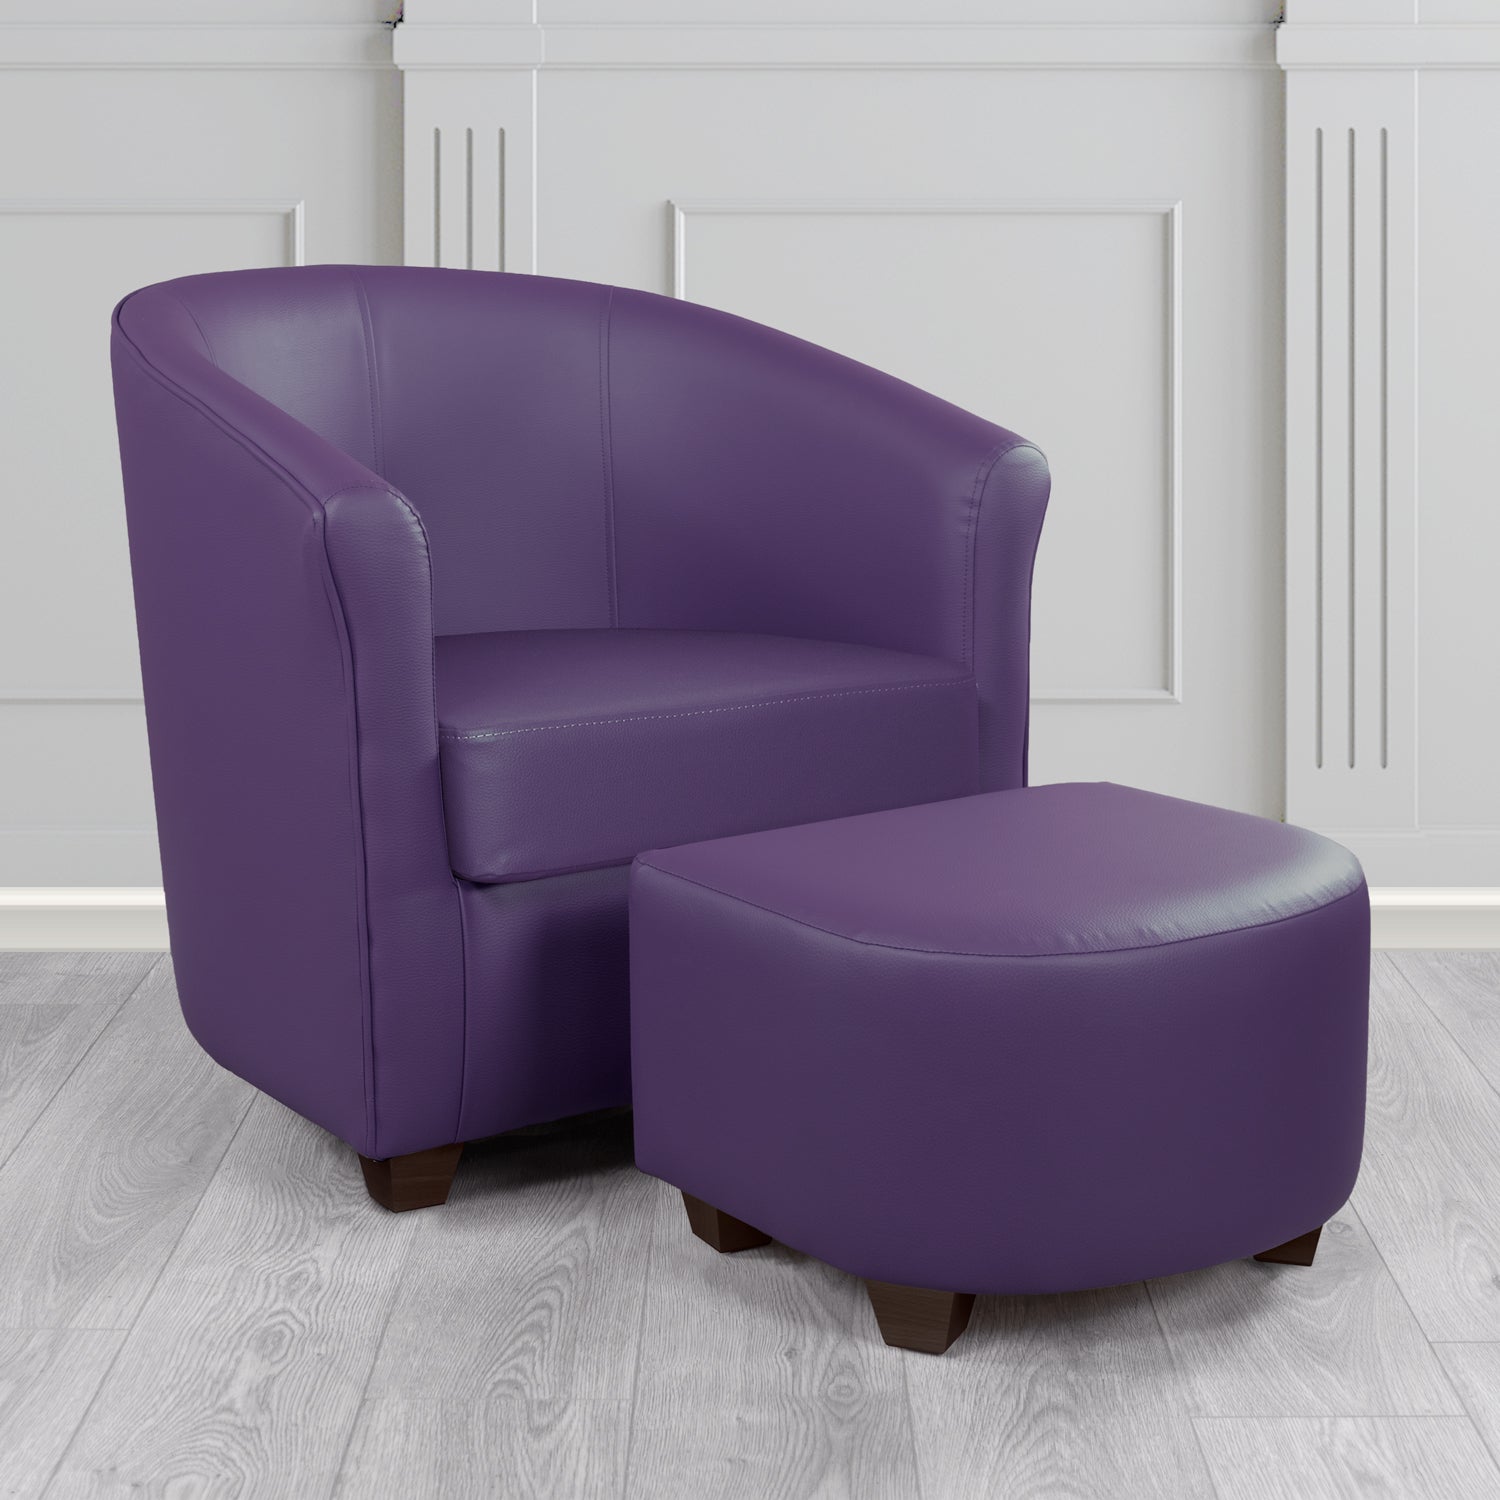 Cannes Tub Chair with Footstool Set in Just Colour Blackberry Crib 5 Faux Leather - The Tub Chair Shop